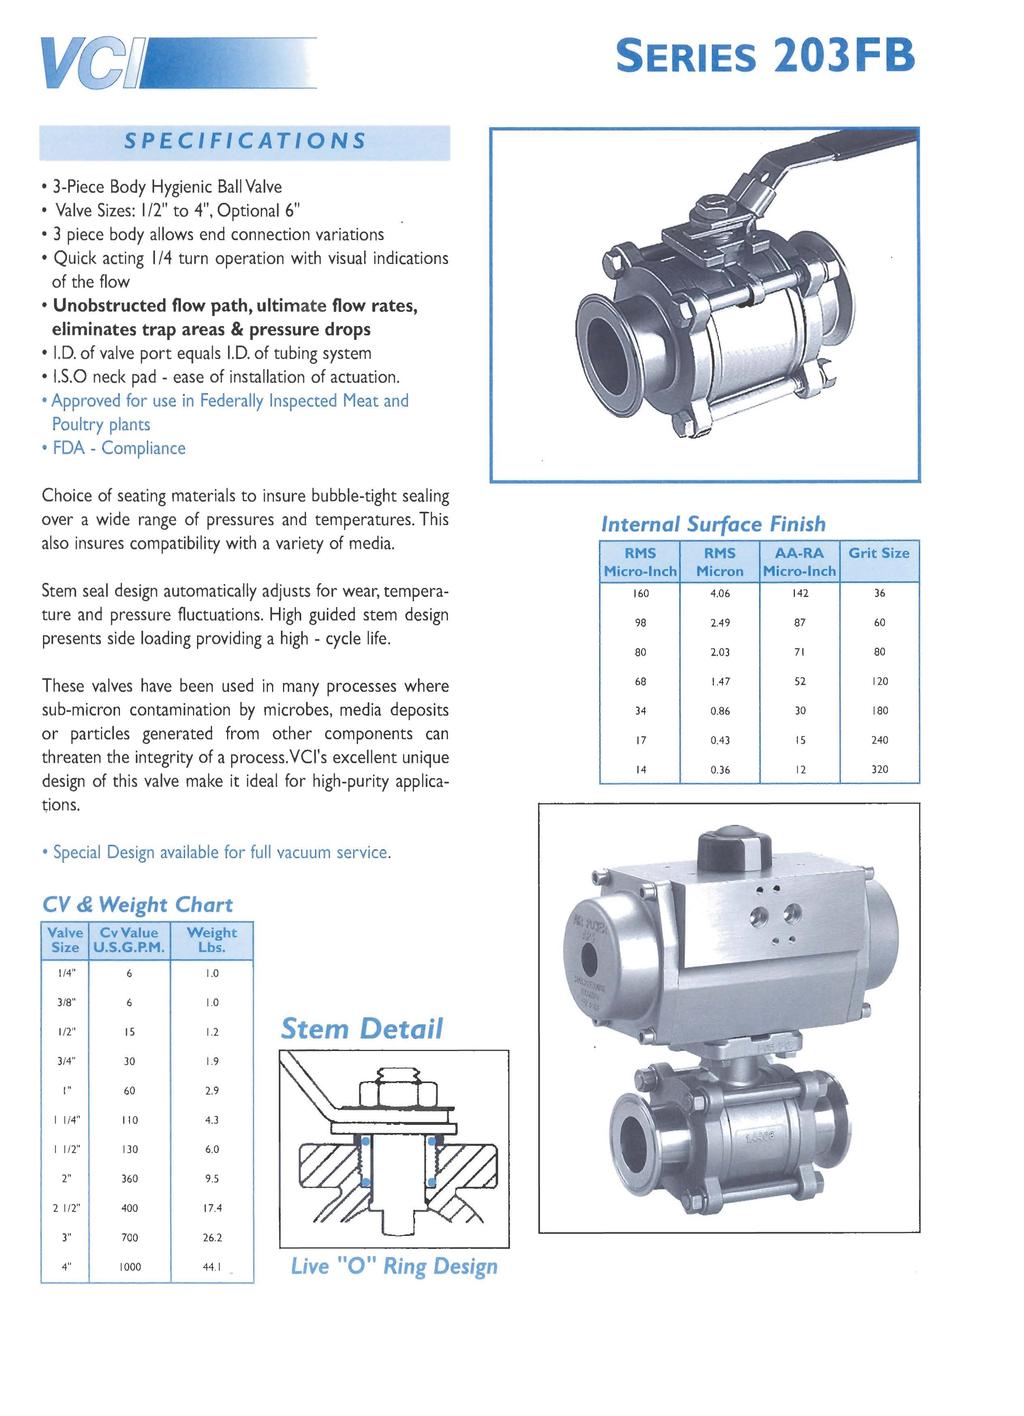 SERIES 203FB 3-Piece Body Hygienic Ball Valve Valve Sizes: I /2" to 4", Optional 6" 3 piece body allows end connection variations Quick acting I /4 turn operation with visual indications of the flow